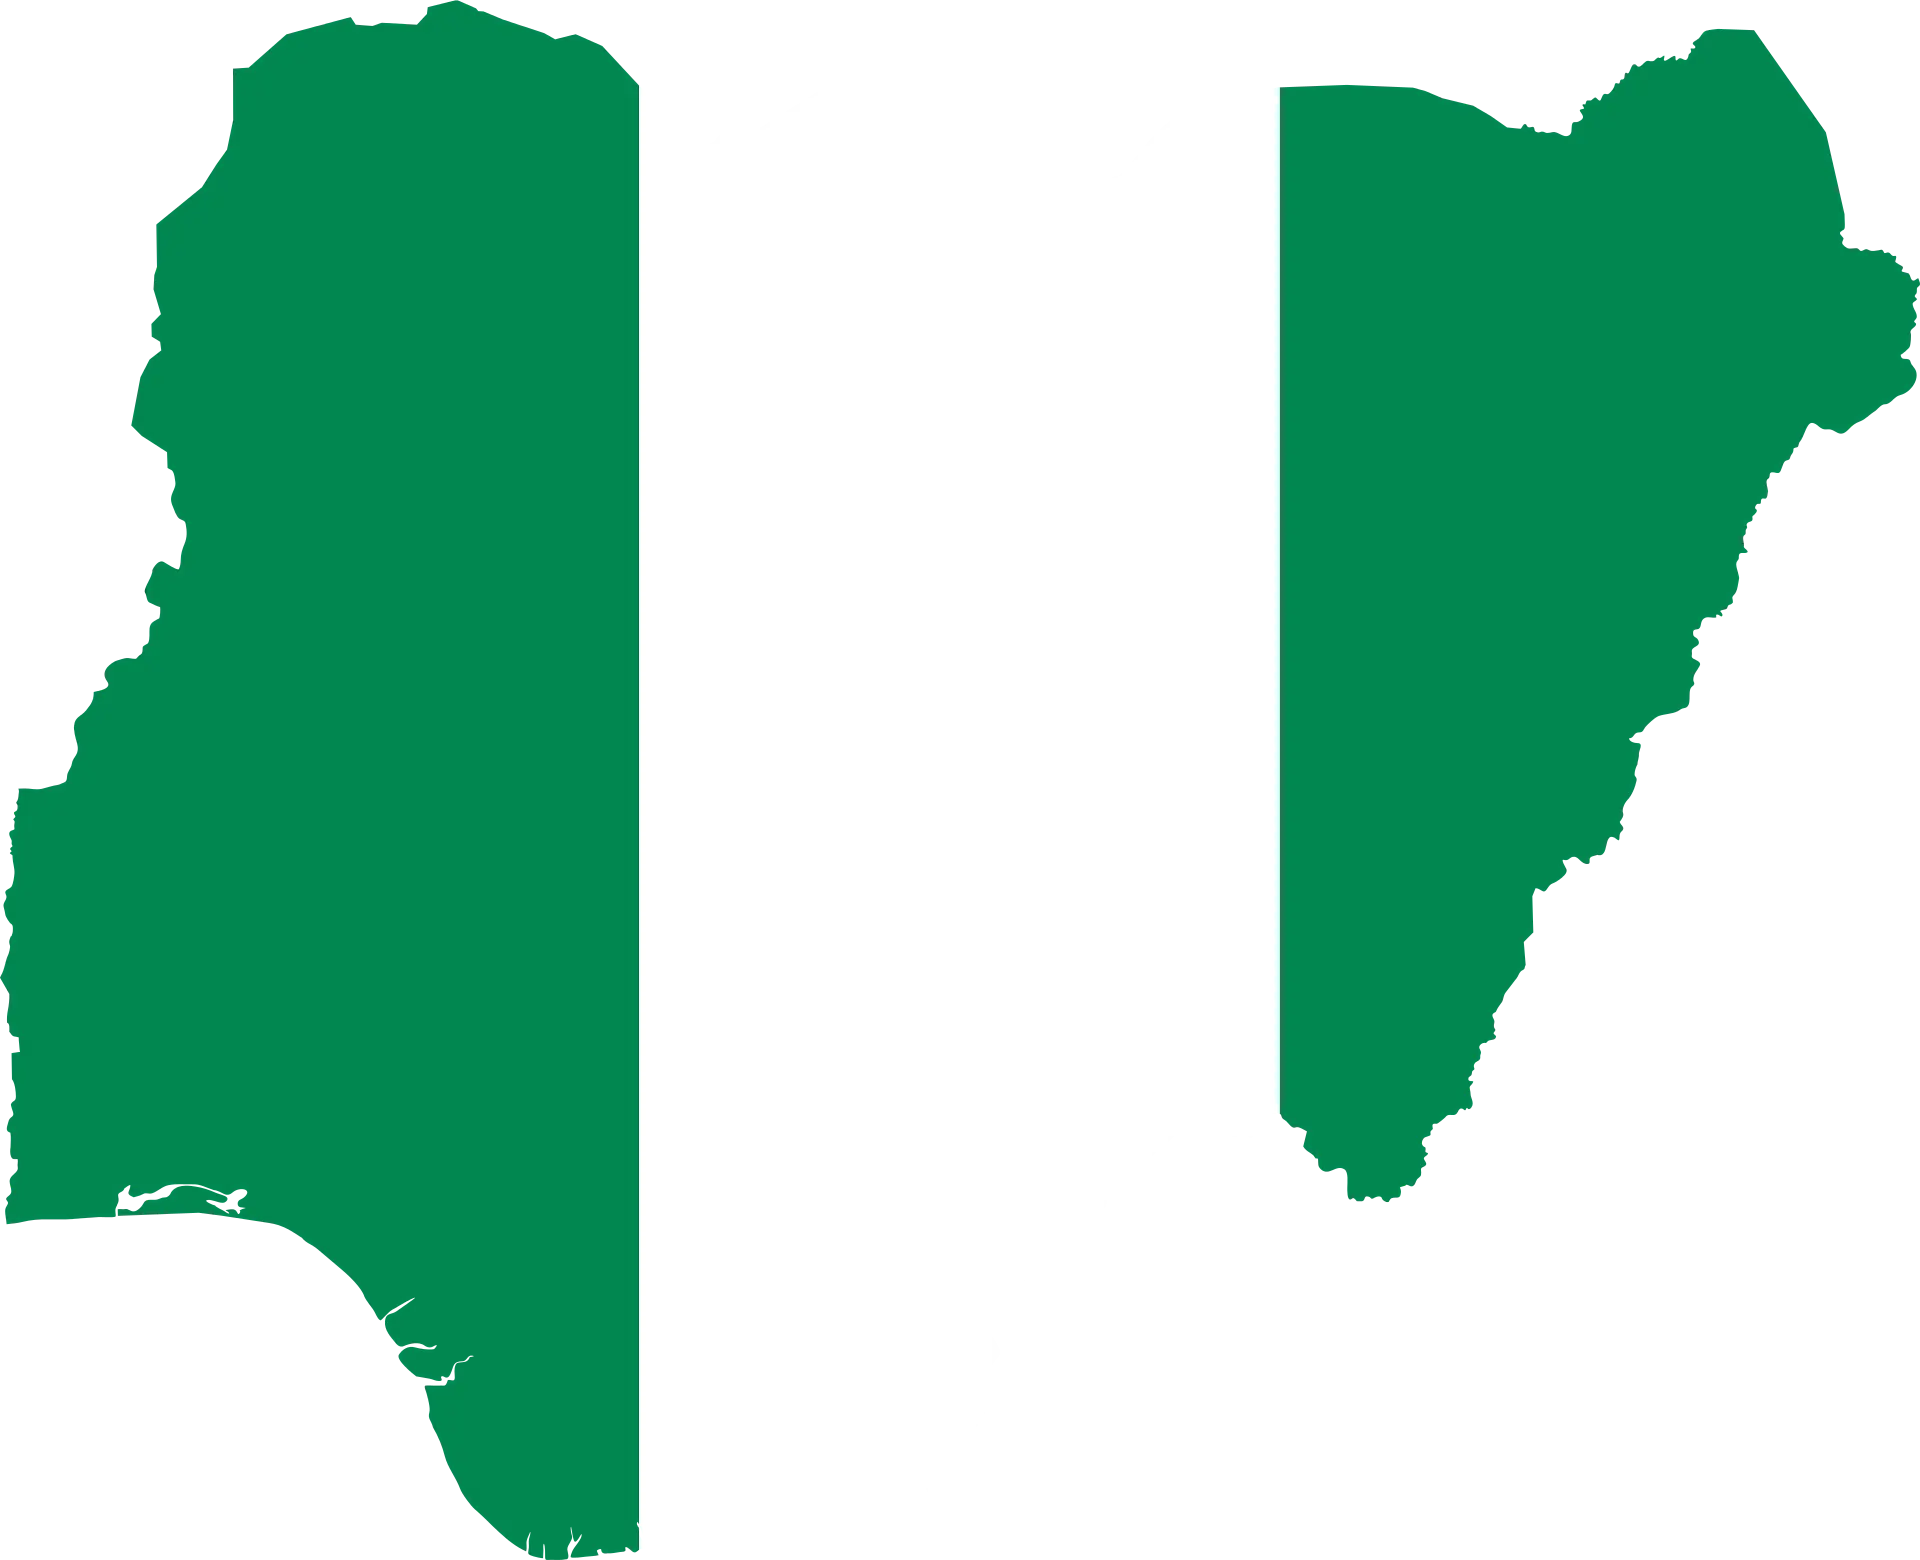 Reflections On Nigeria's Issues